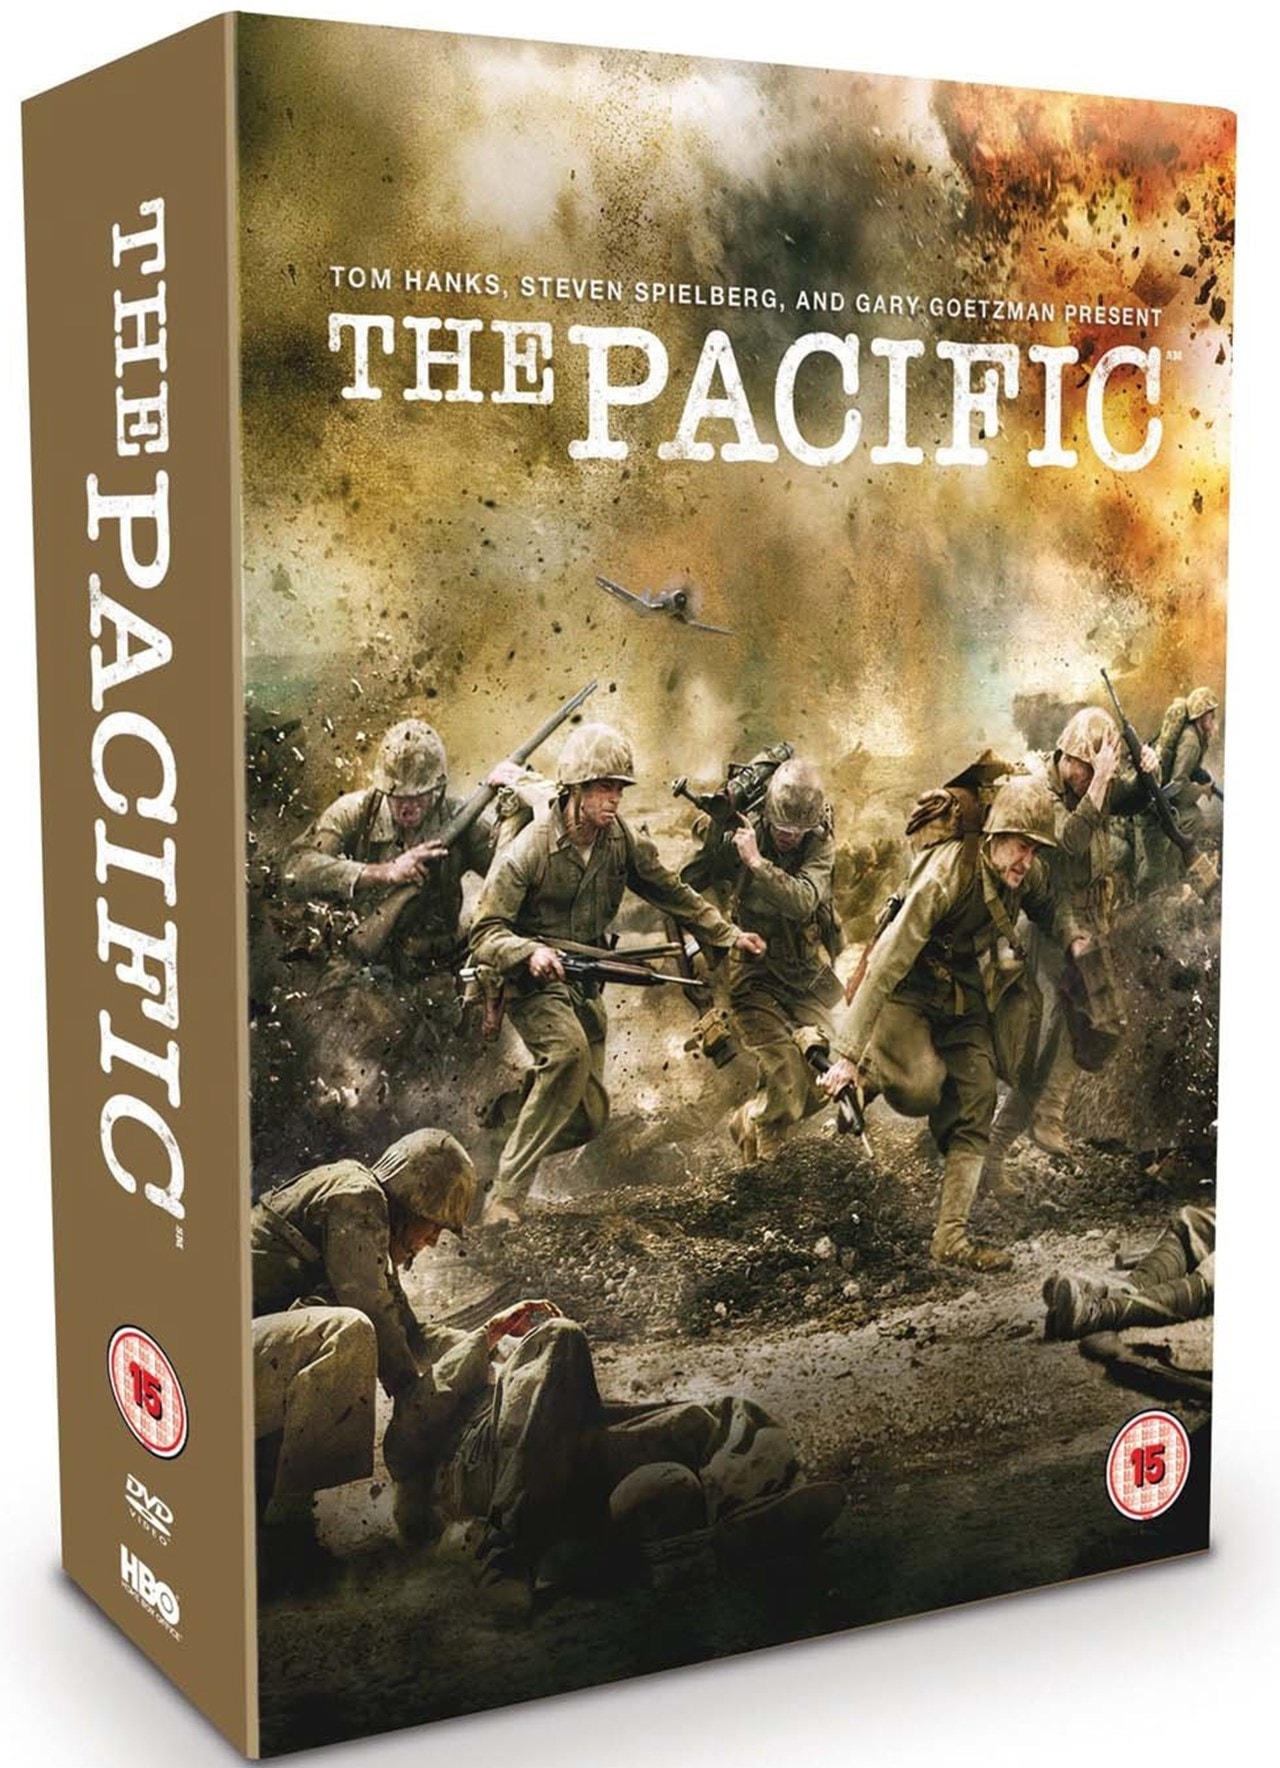 The Pacific | DVD Box Set | Free shipping over £20 | HMV Store